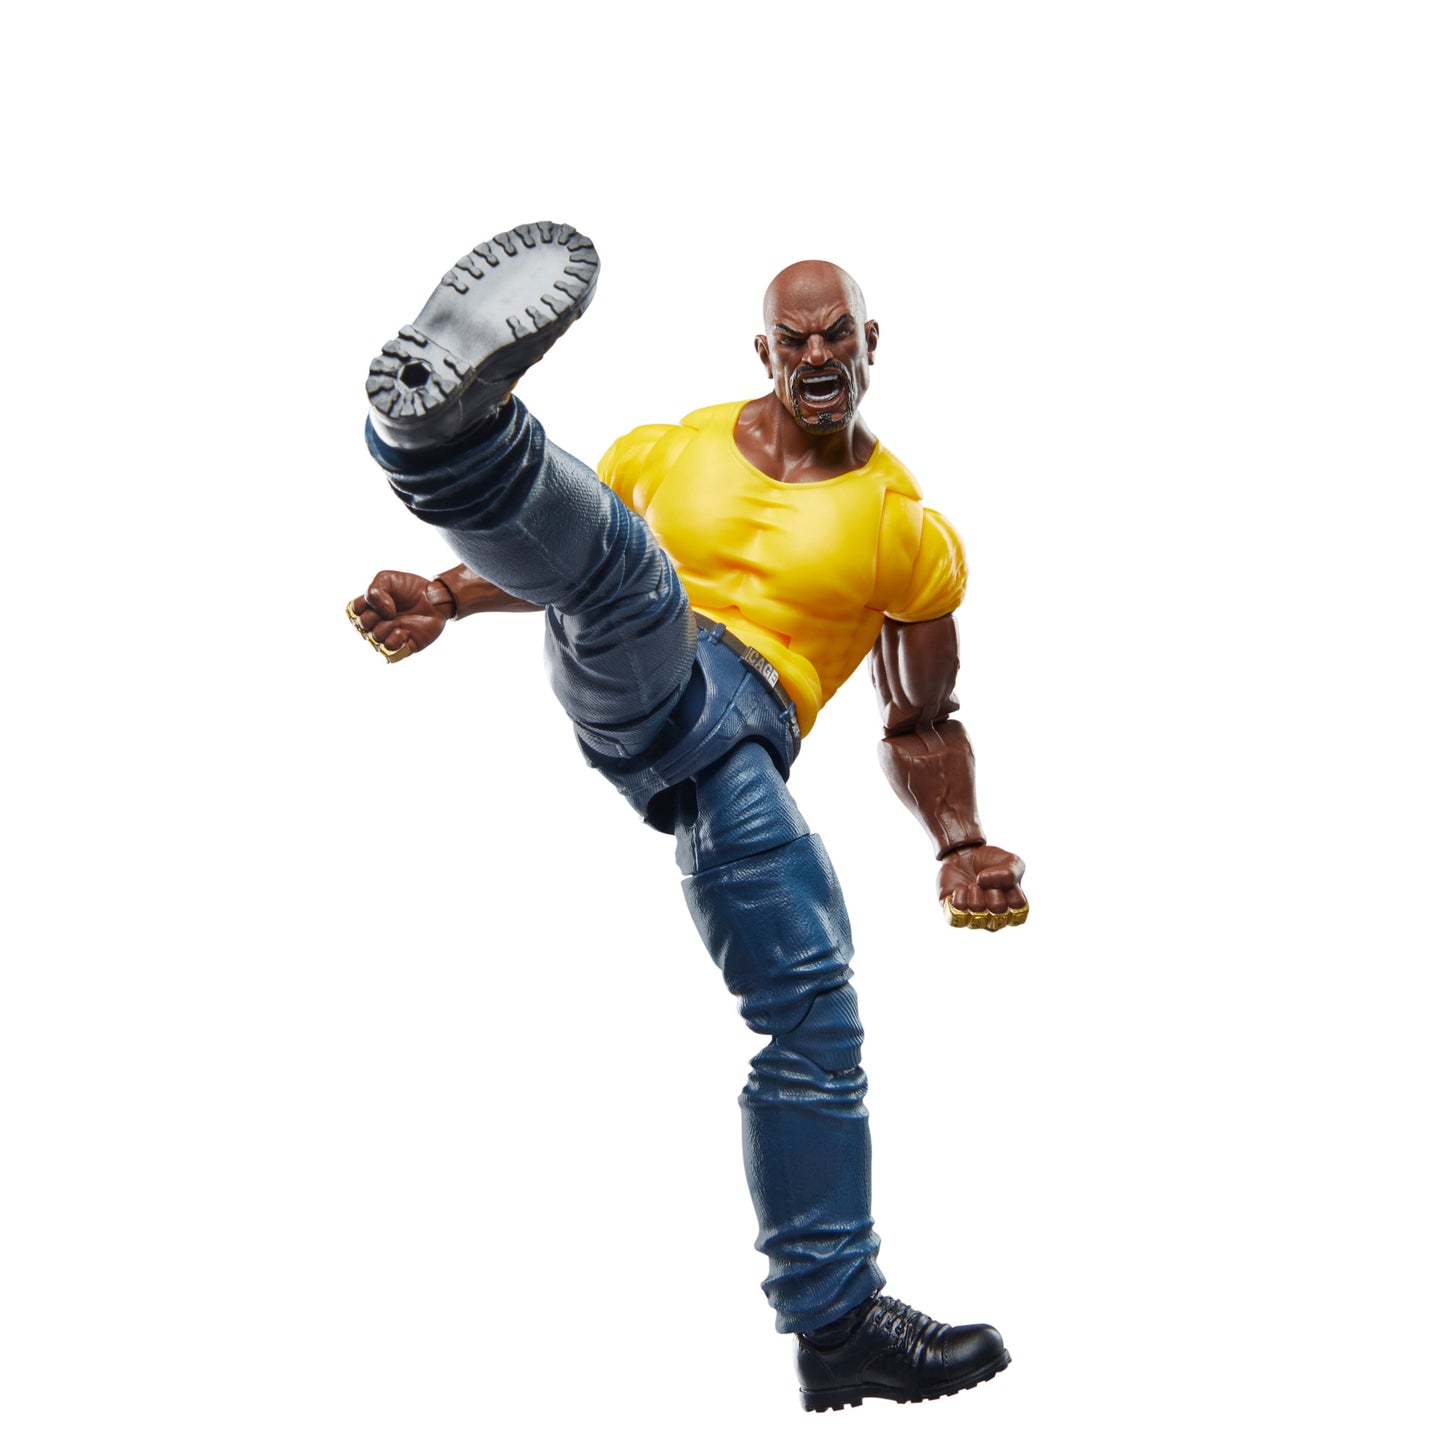 Marvel Legends Series Iron Fist and Luke Cage, Marvel 85th Anniversary Comics Collectible 6-Inch Action Figures